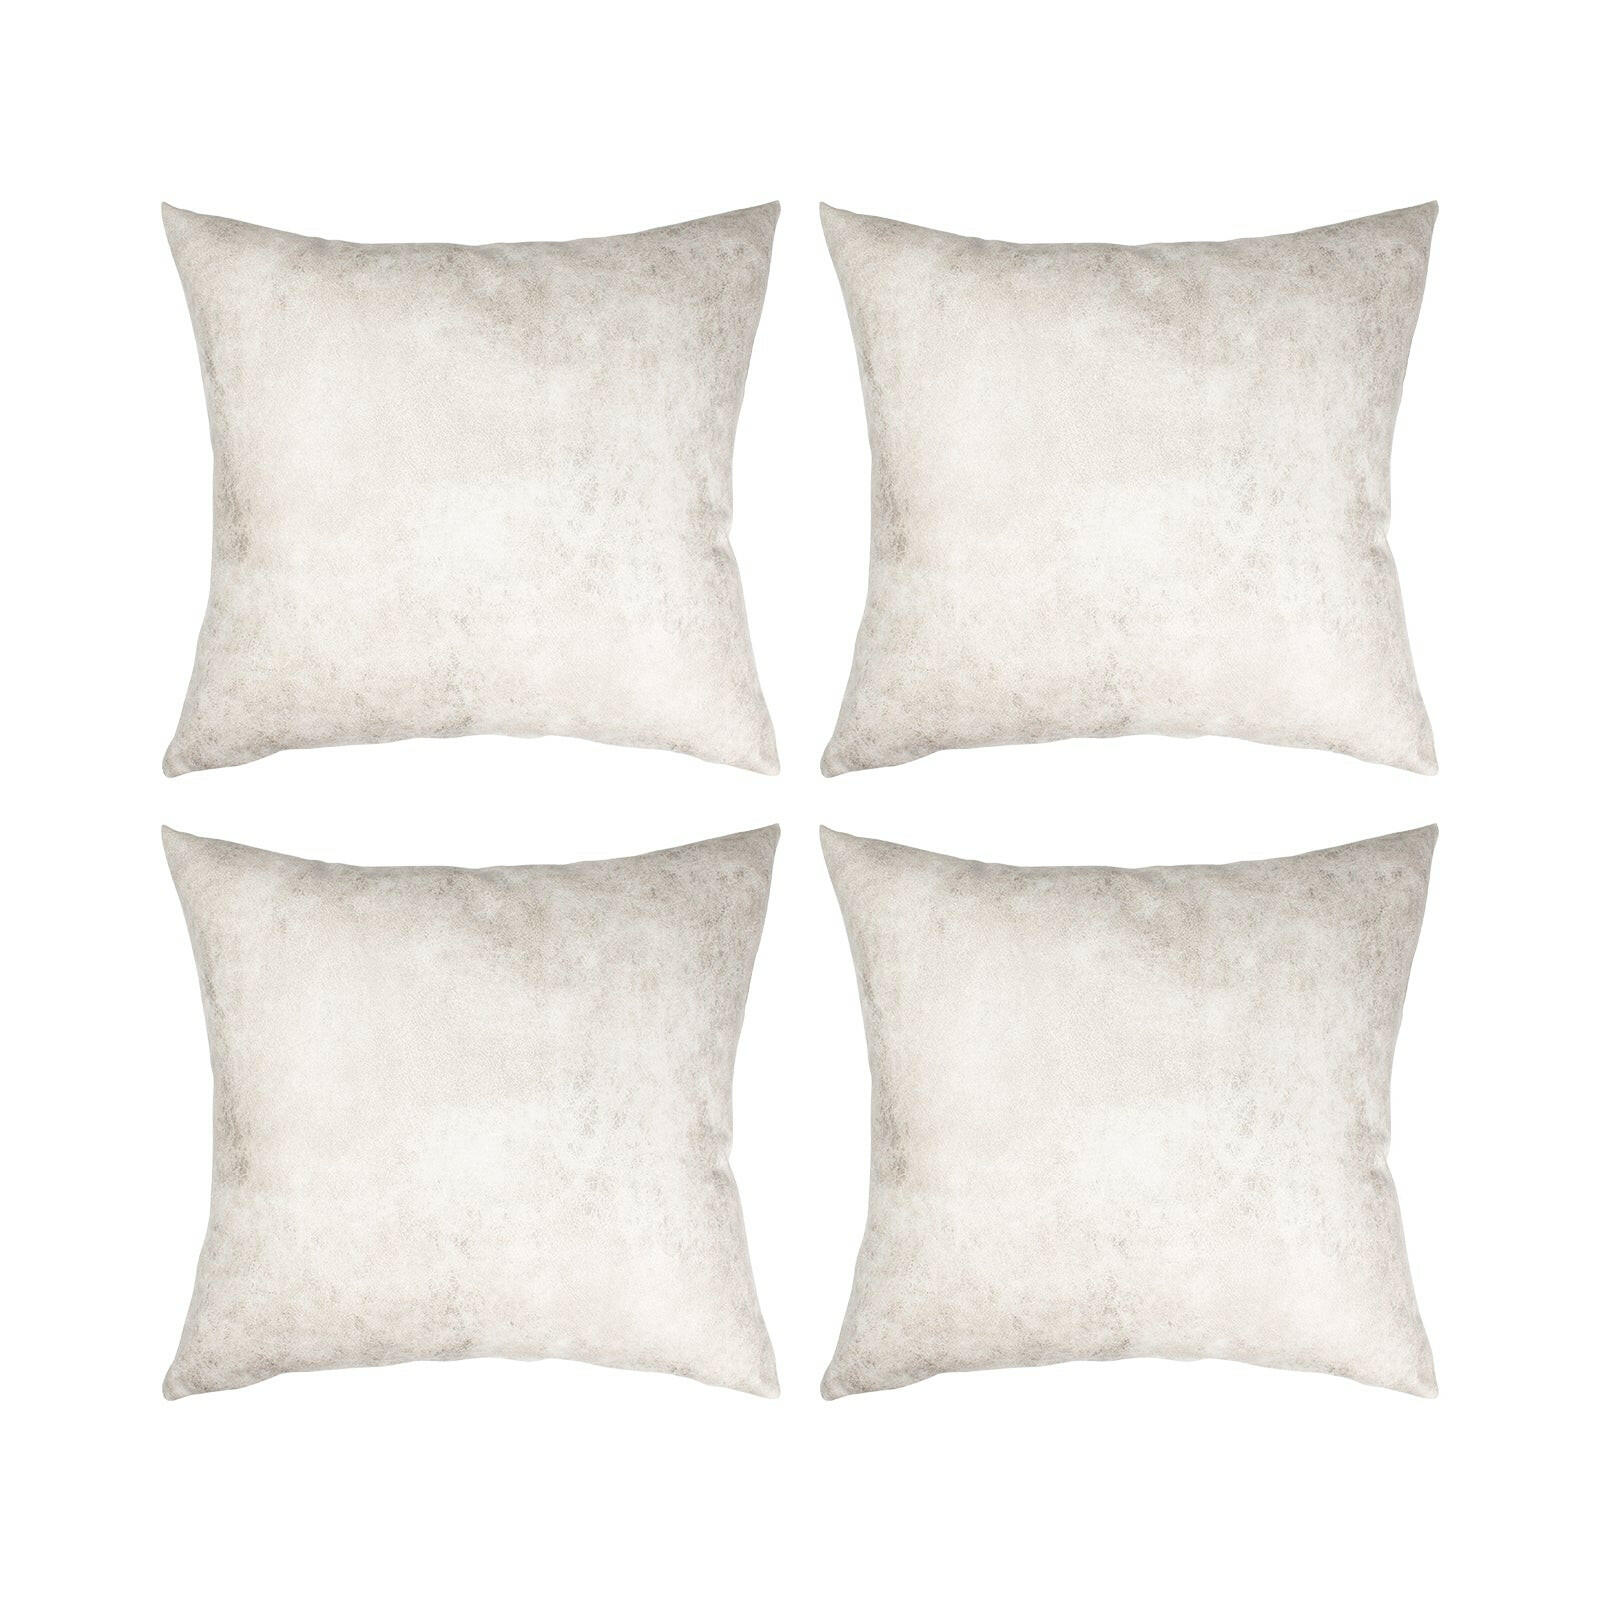 White Vegan Leather Sublimation Pillow Cases - 4 Pack.